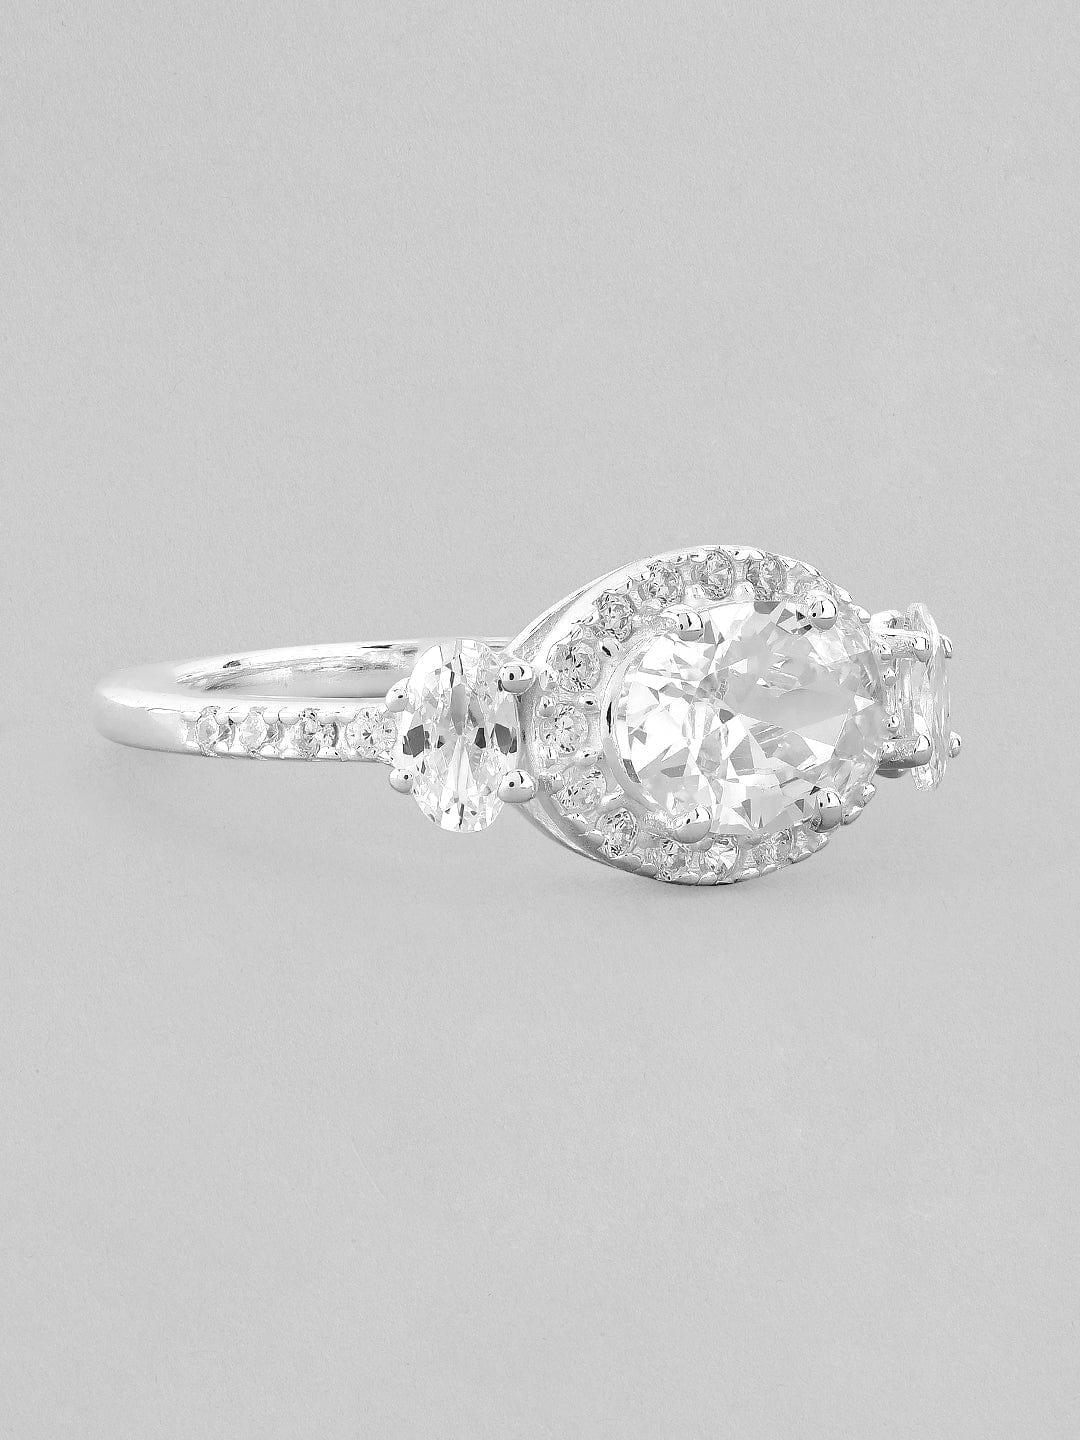 The Sparkling Zirconia Ring - Indiakreations